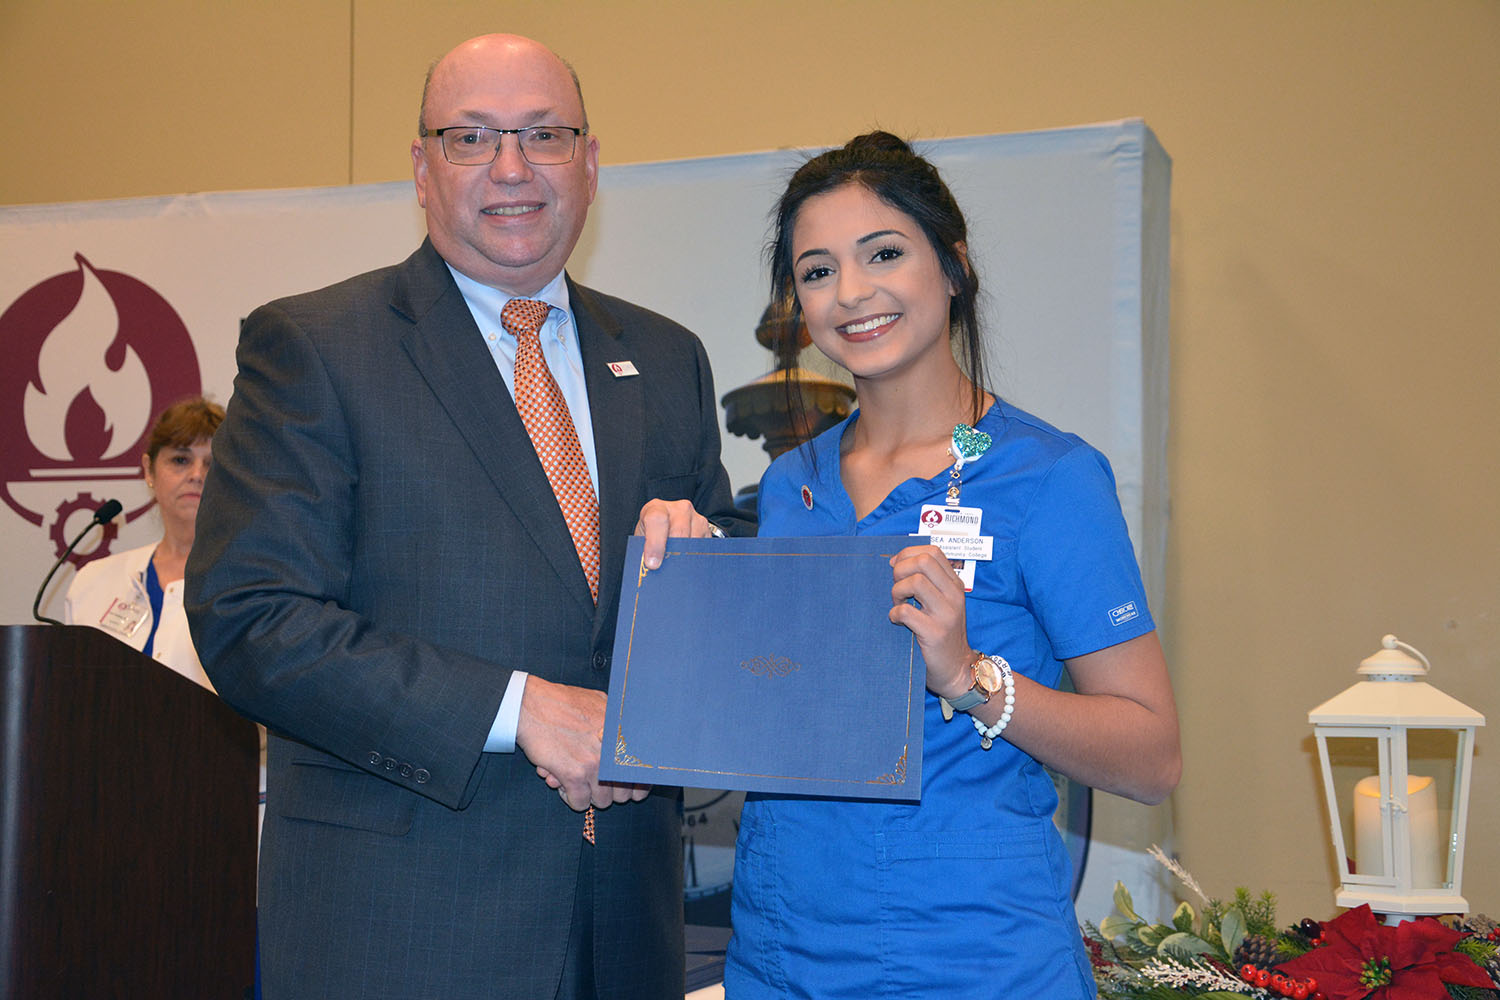 Richmond Community College nursing assistant student, Kelsea Anderson of Hamlet shakes hand with Dr. Dale McInnis, president of the College, during the pinning ceremony help for students completing the program.